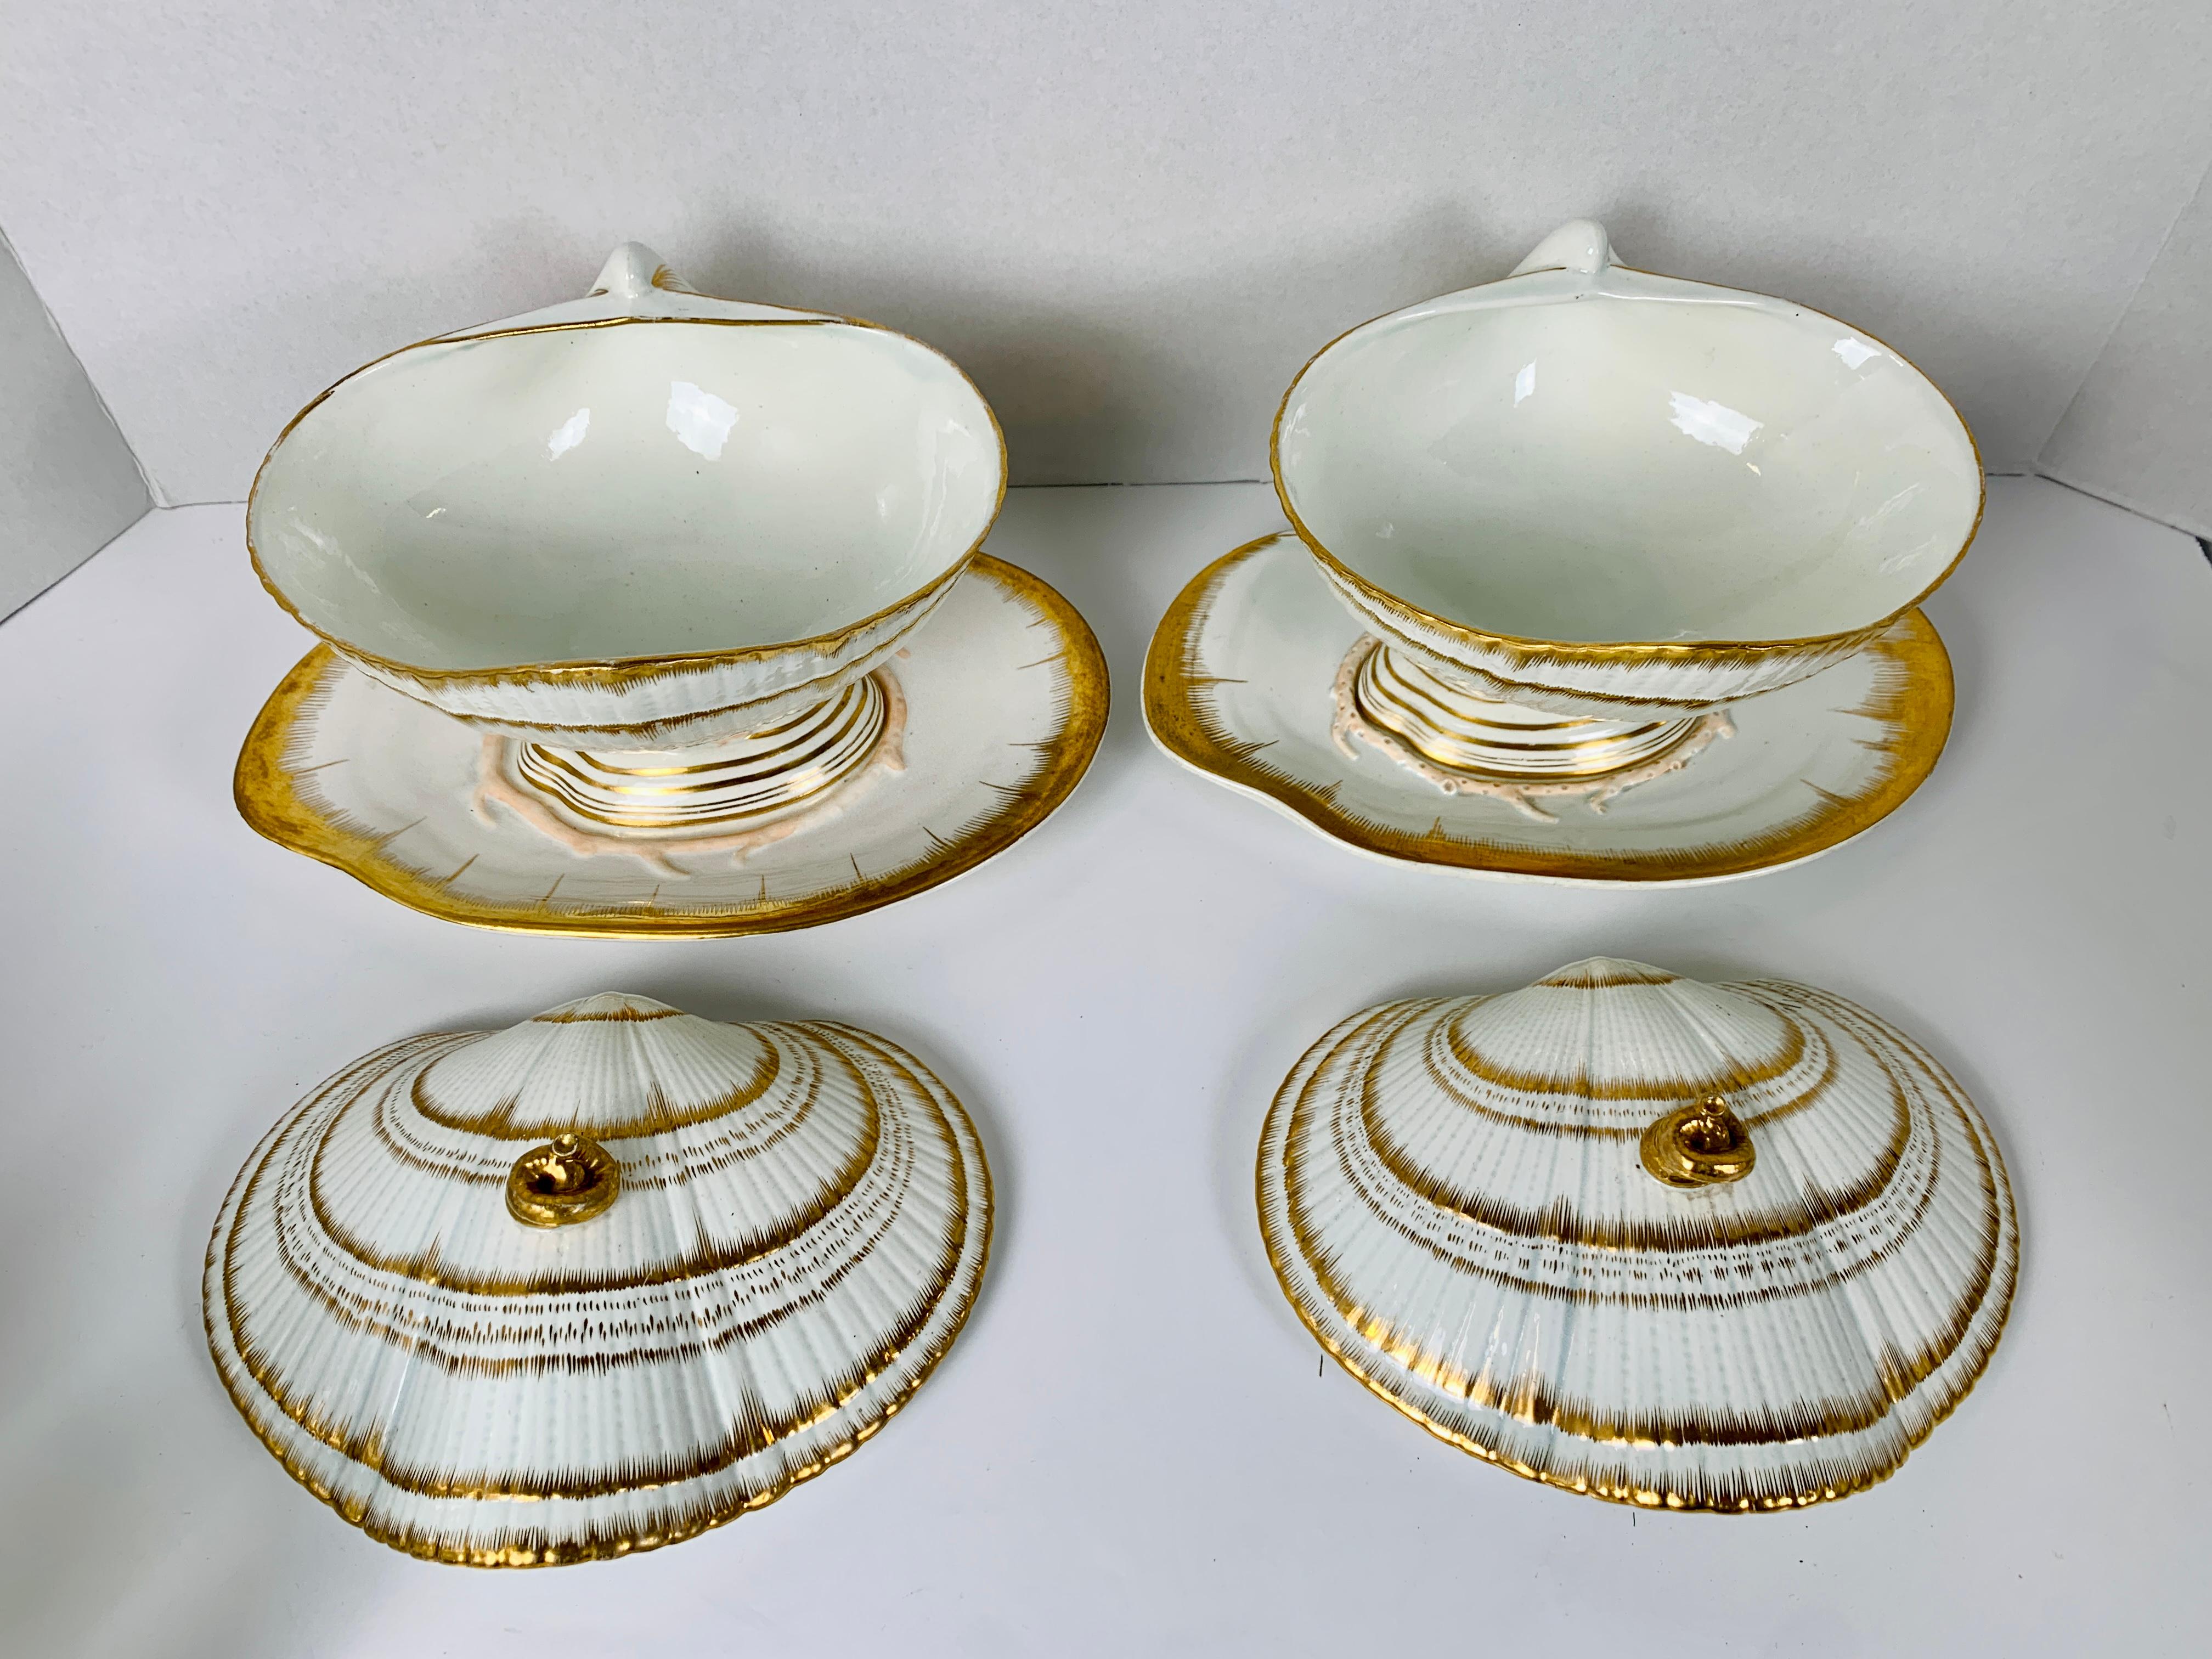 Earthenware Wedgwood Set with Scallop Shell Shaped Dishes, Clam Shaped Tureens & a Nautilus